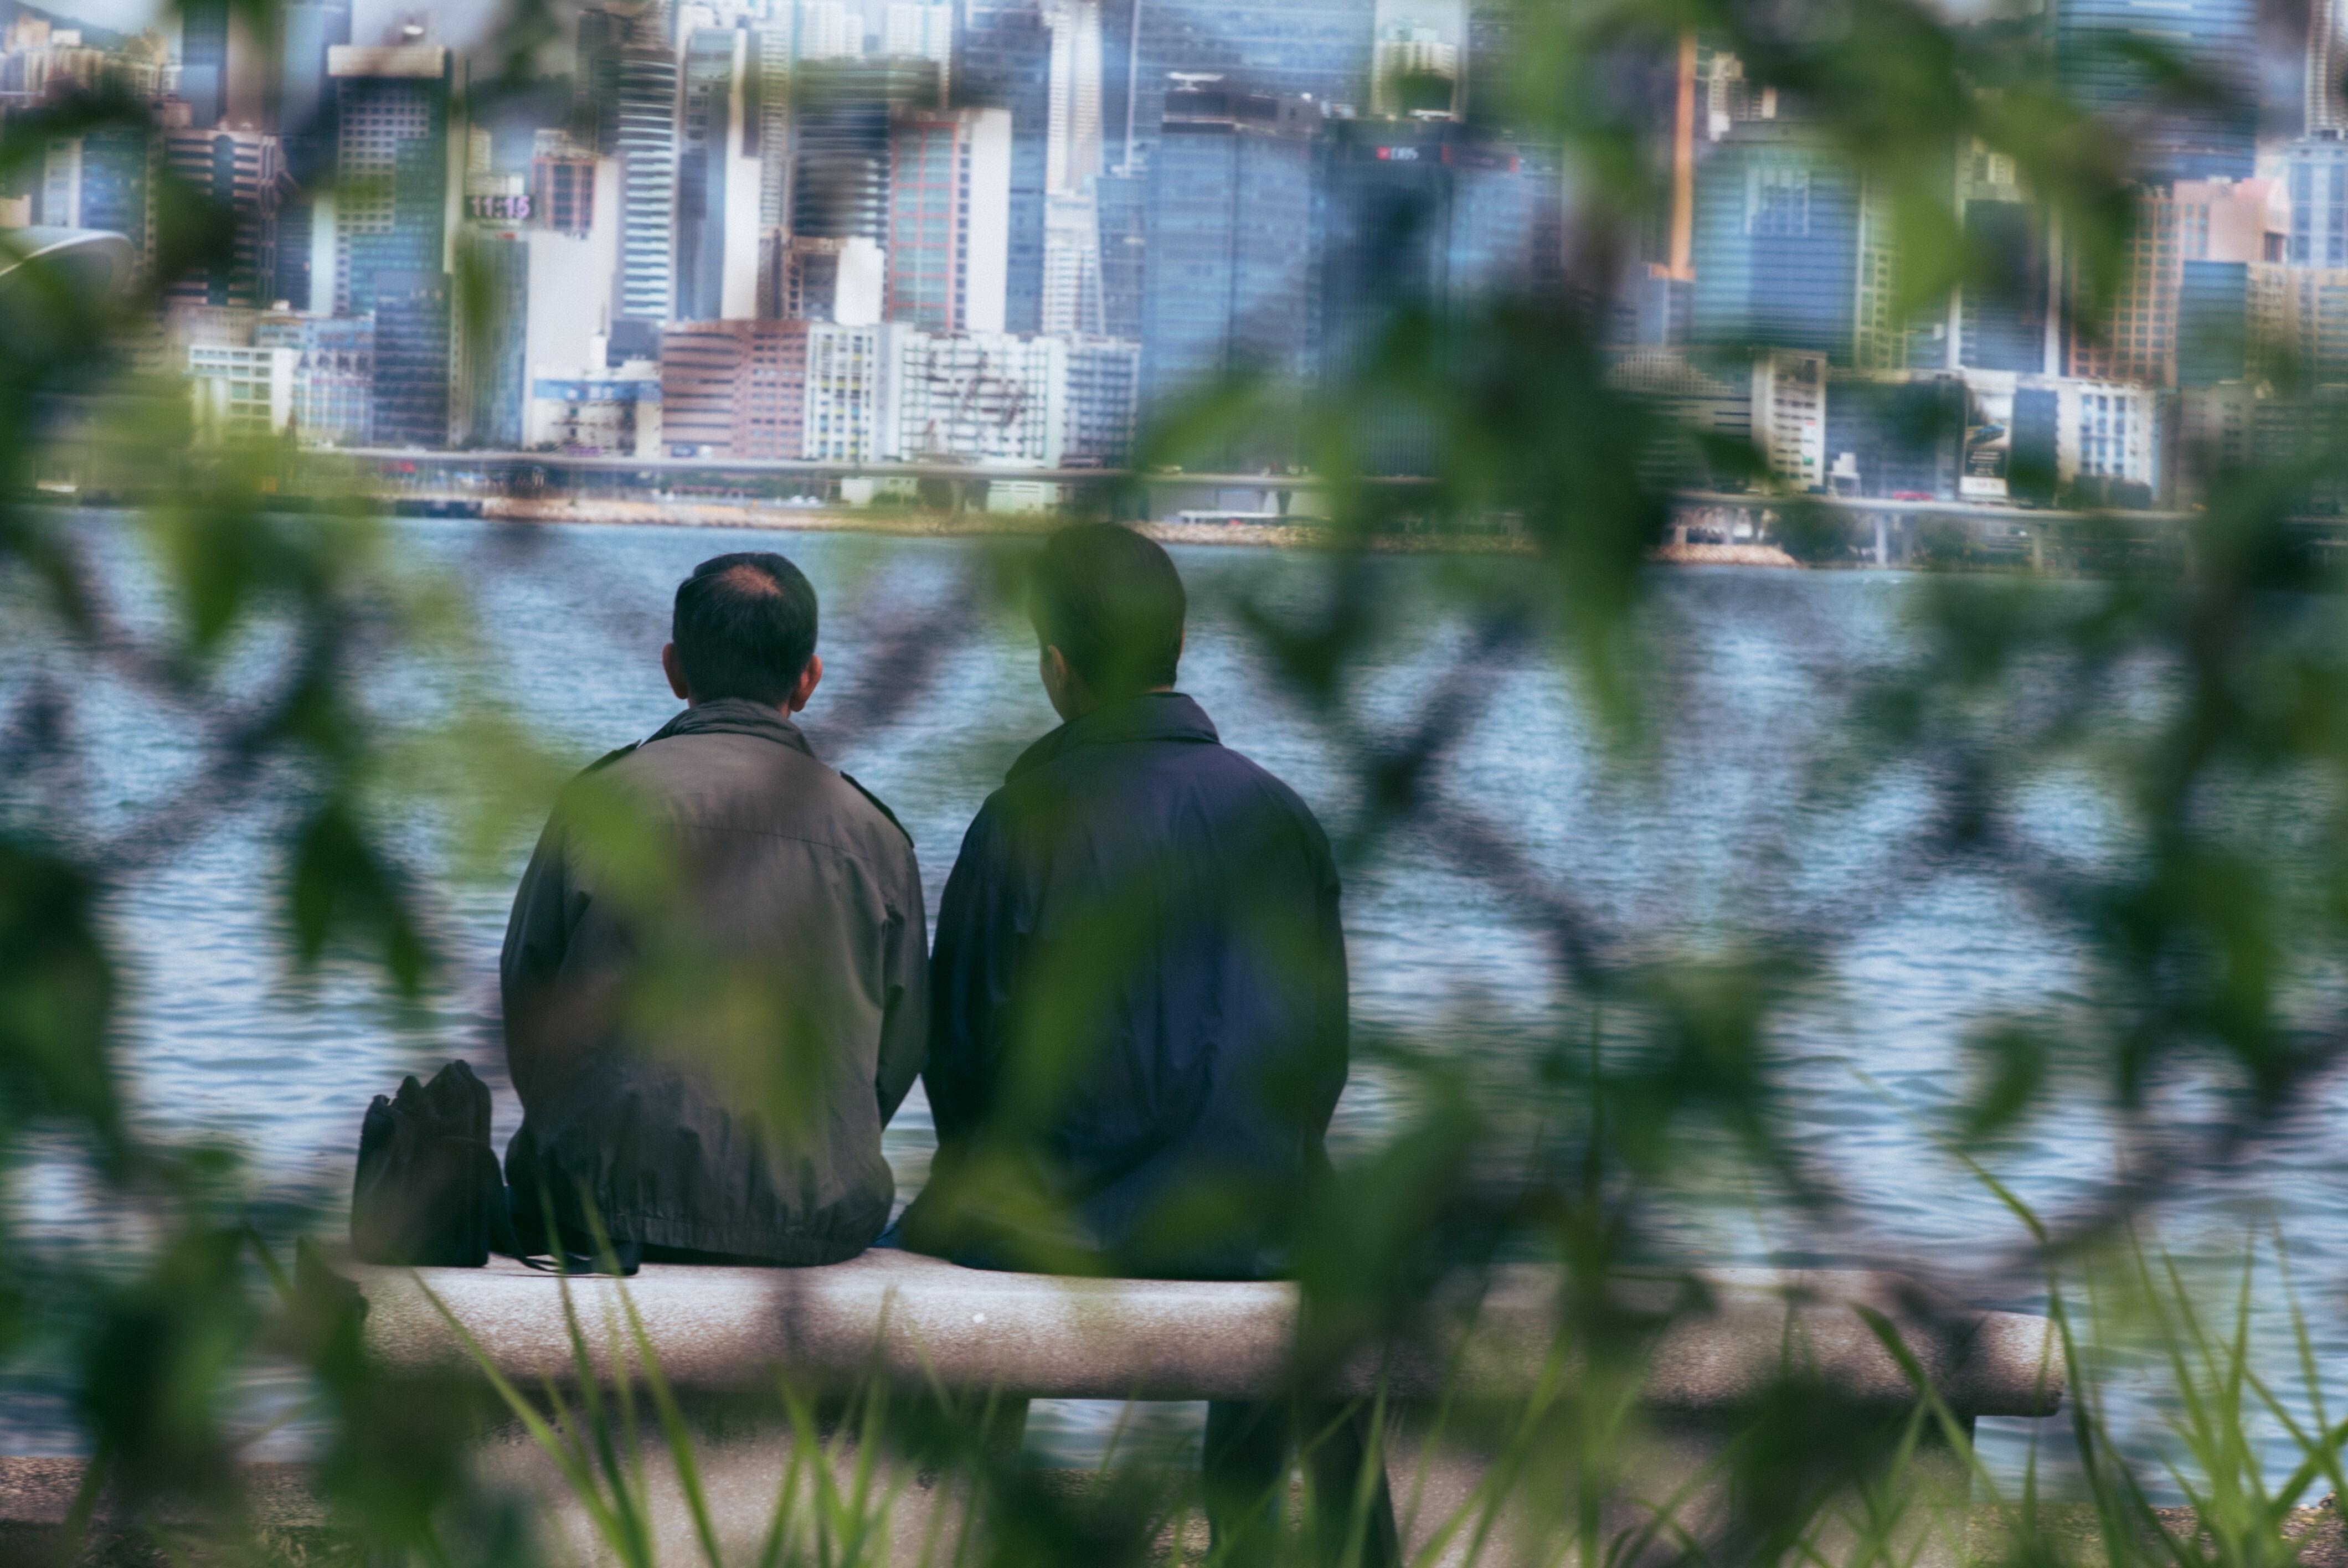 A still from the film Suk Suk, released in 2019, which chronicles the twilight affair of two closeted family men. Hong Kong is blessed with cinematic talents, and the government must offer more avenues for their work to shine. Photo: Handout